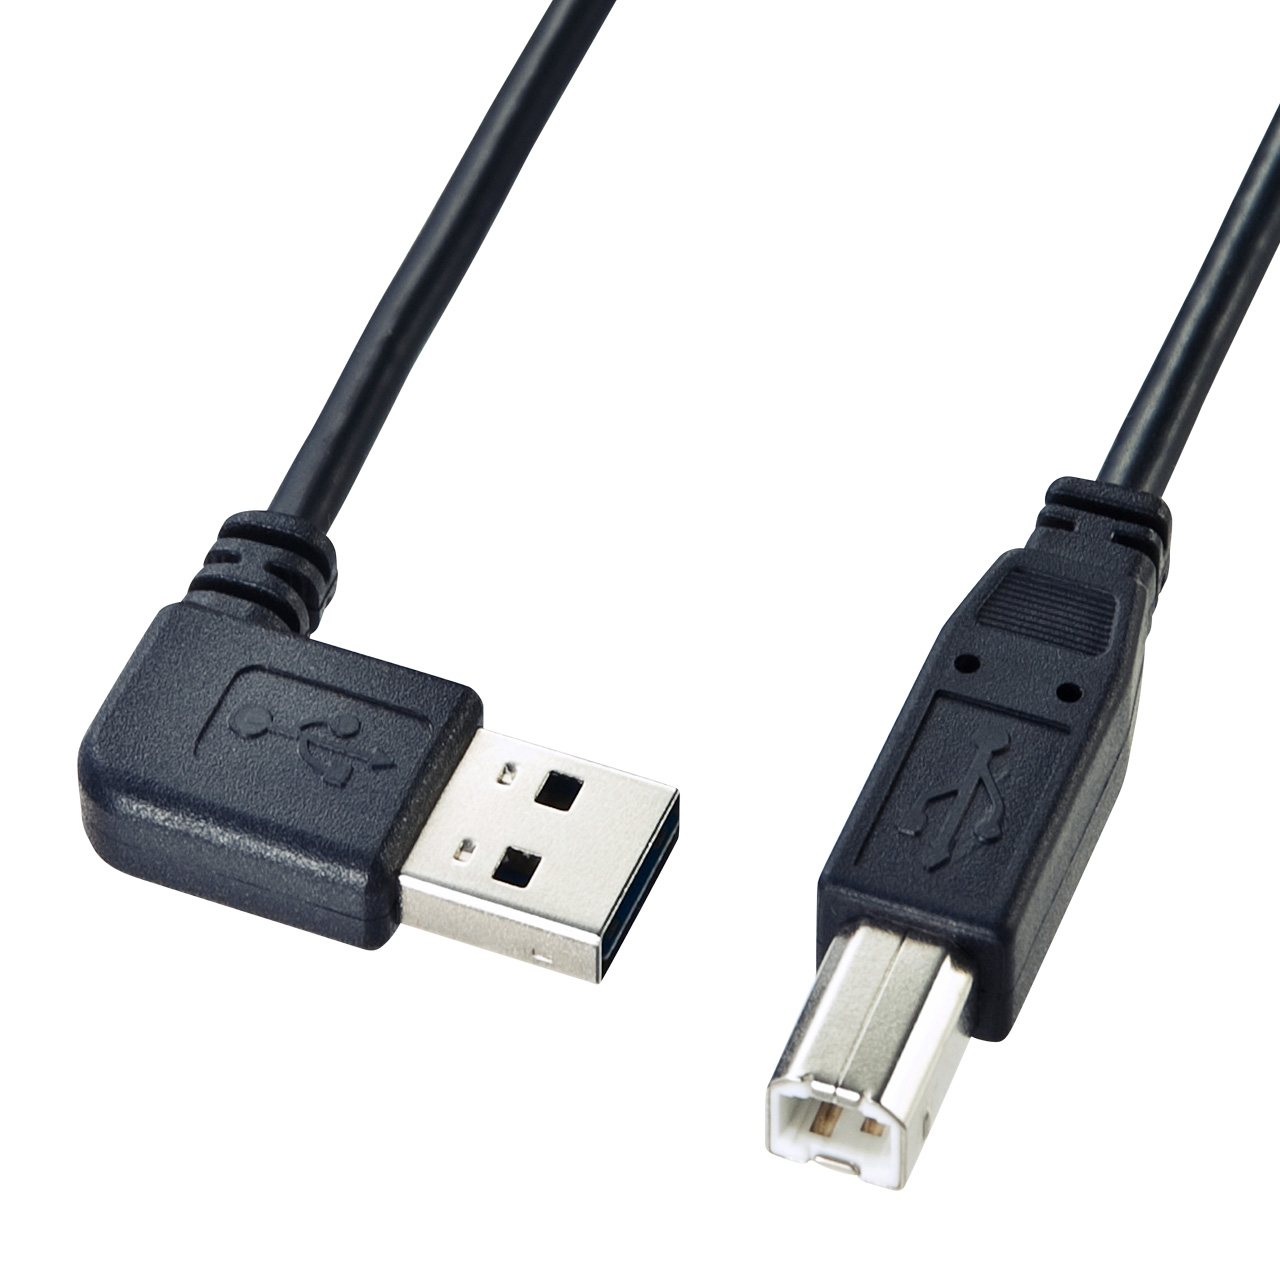 L-shaped USB cable with both sides insertable (A-B standard) (Sanwa Supply)